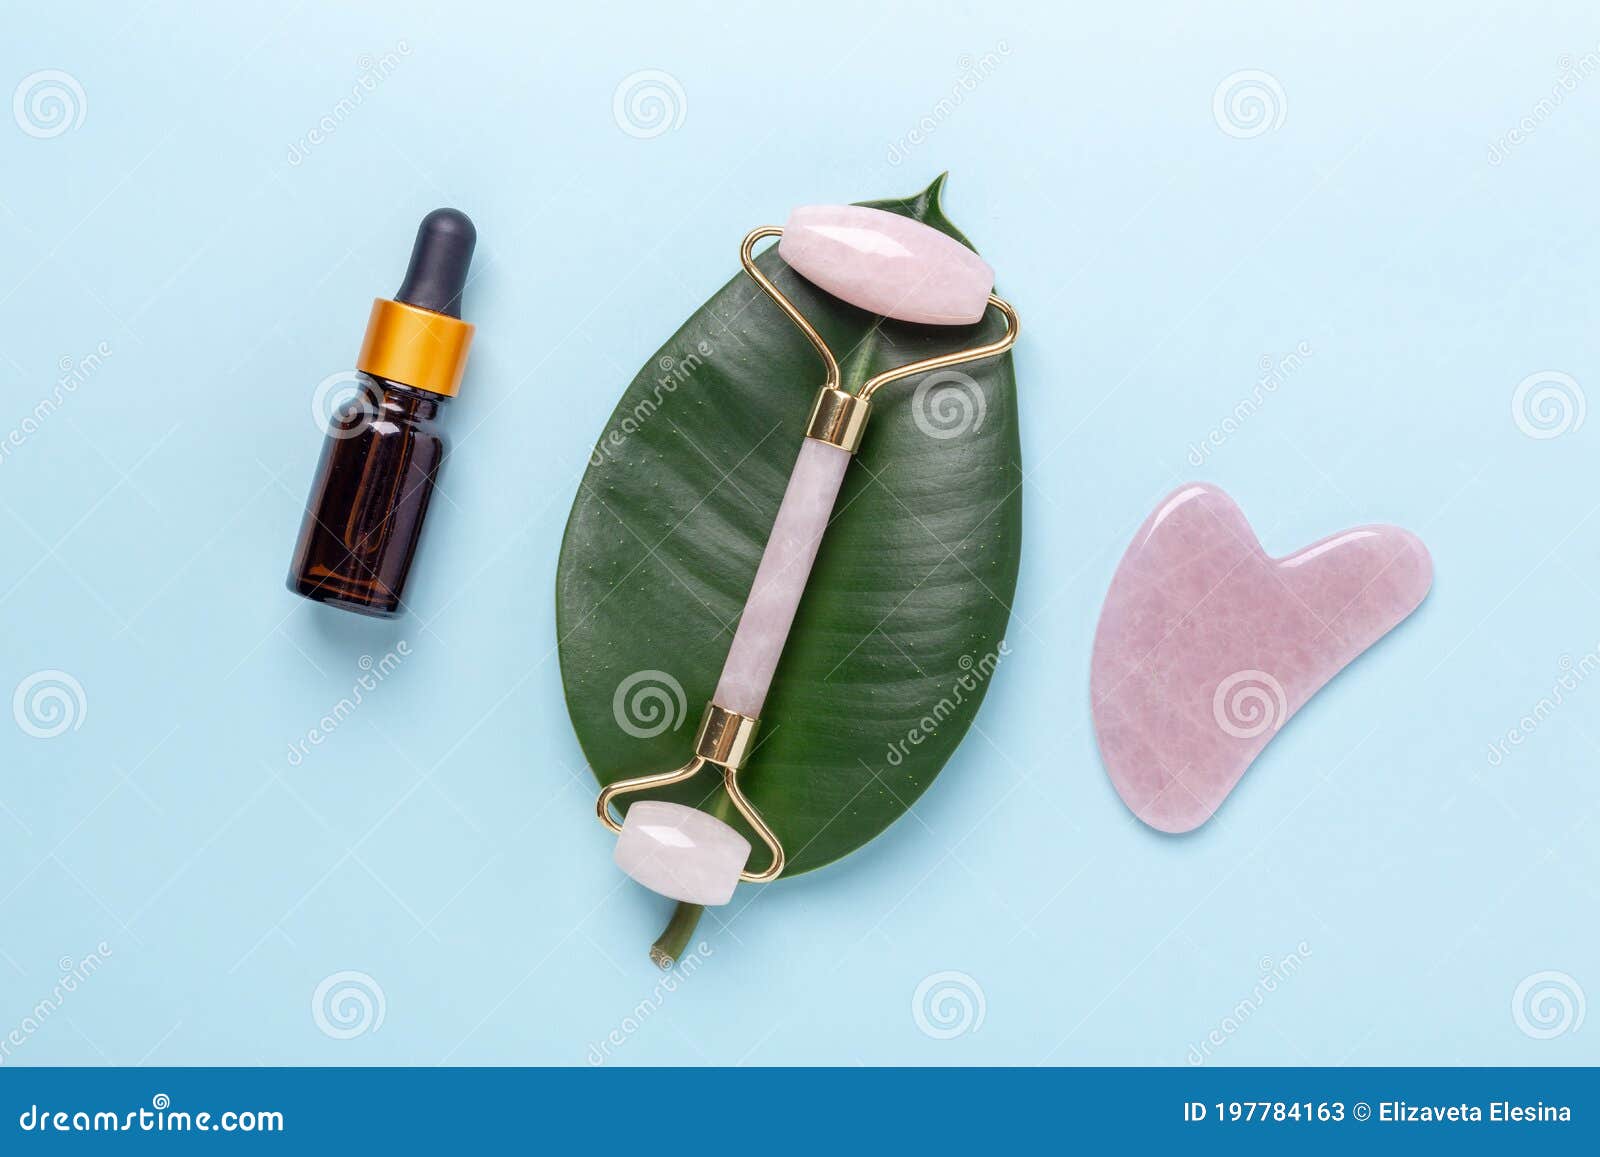 cosmetic bottles, face serum, facial massage roller and gua sha massager on blue background. anti age, lifting and toning